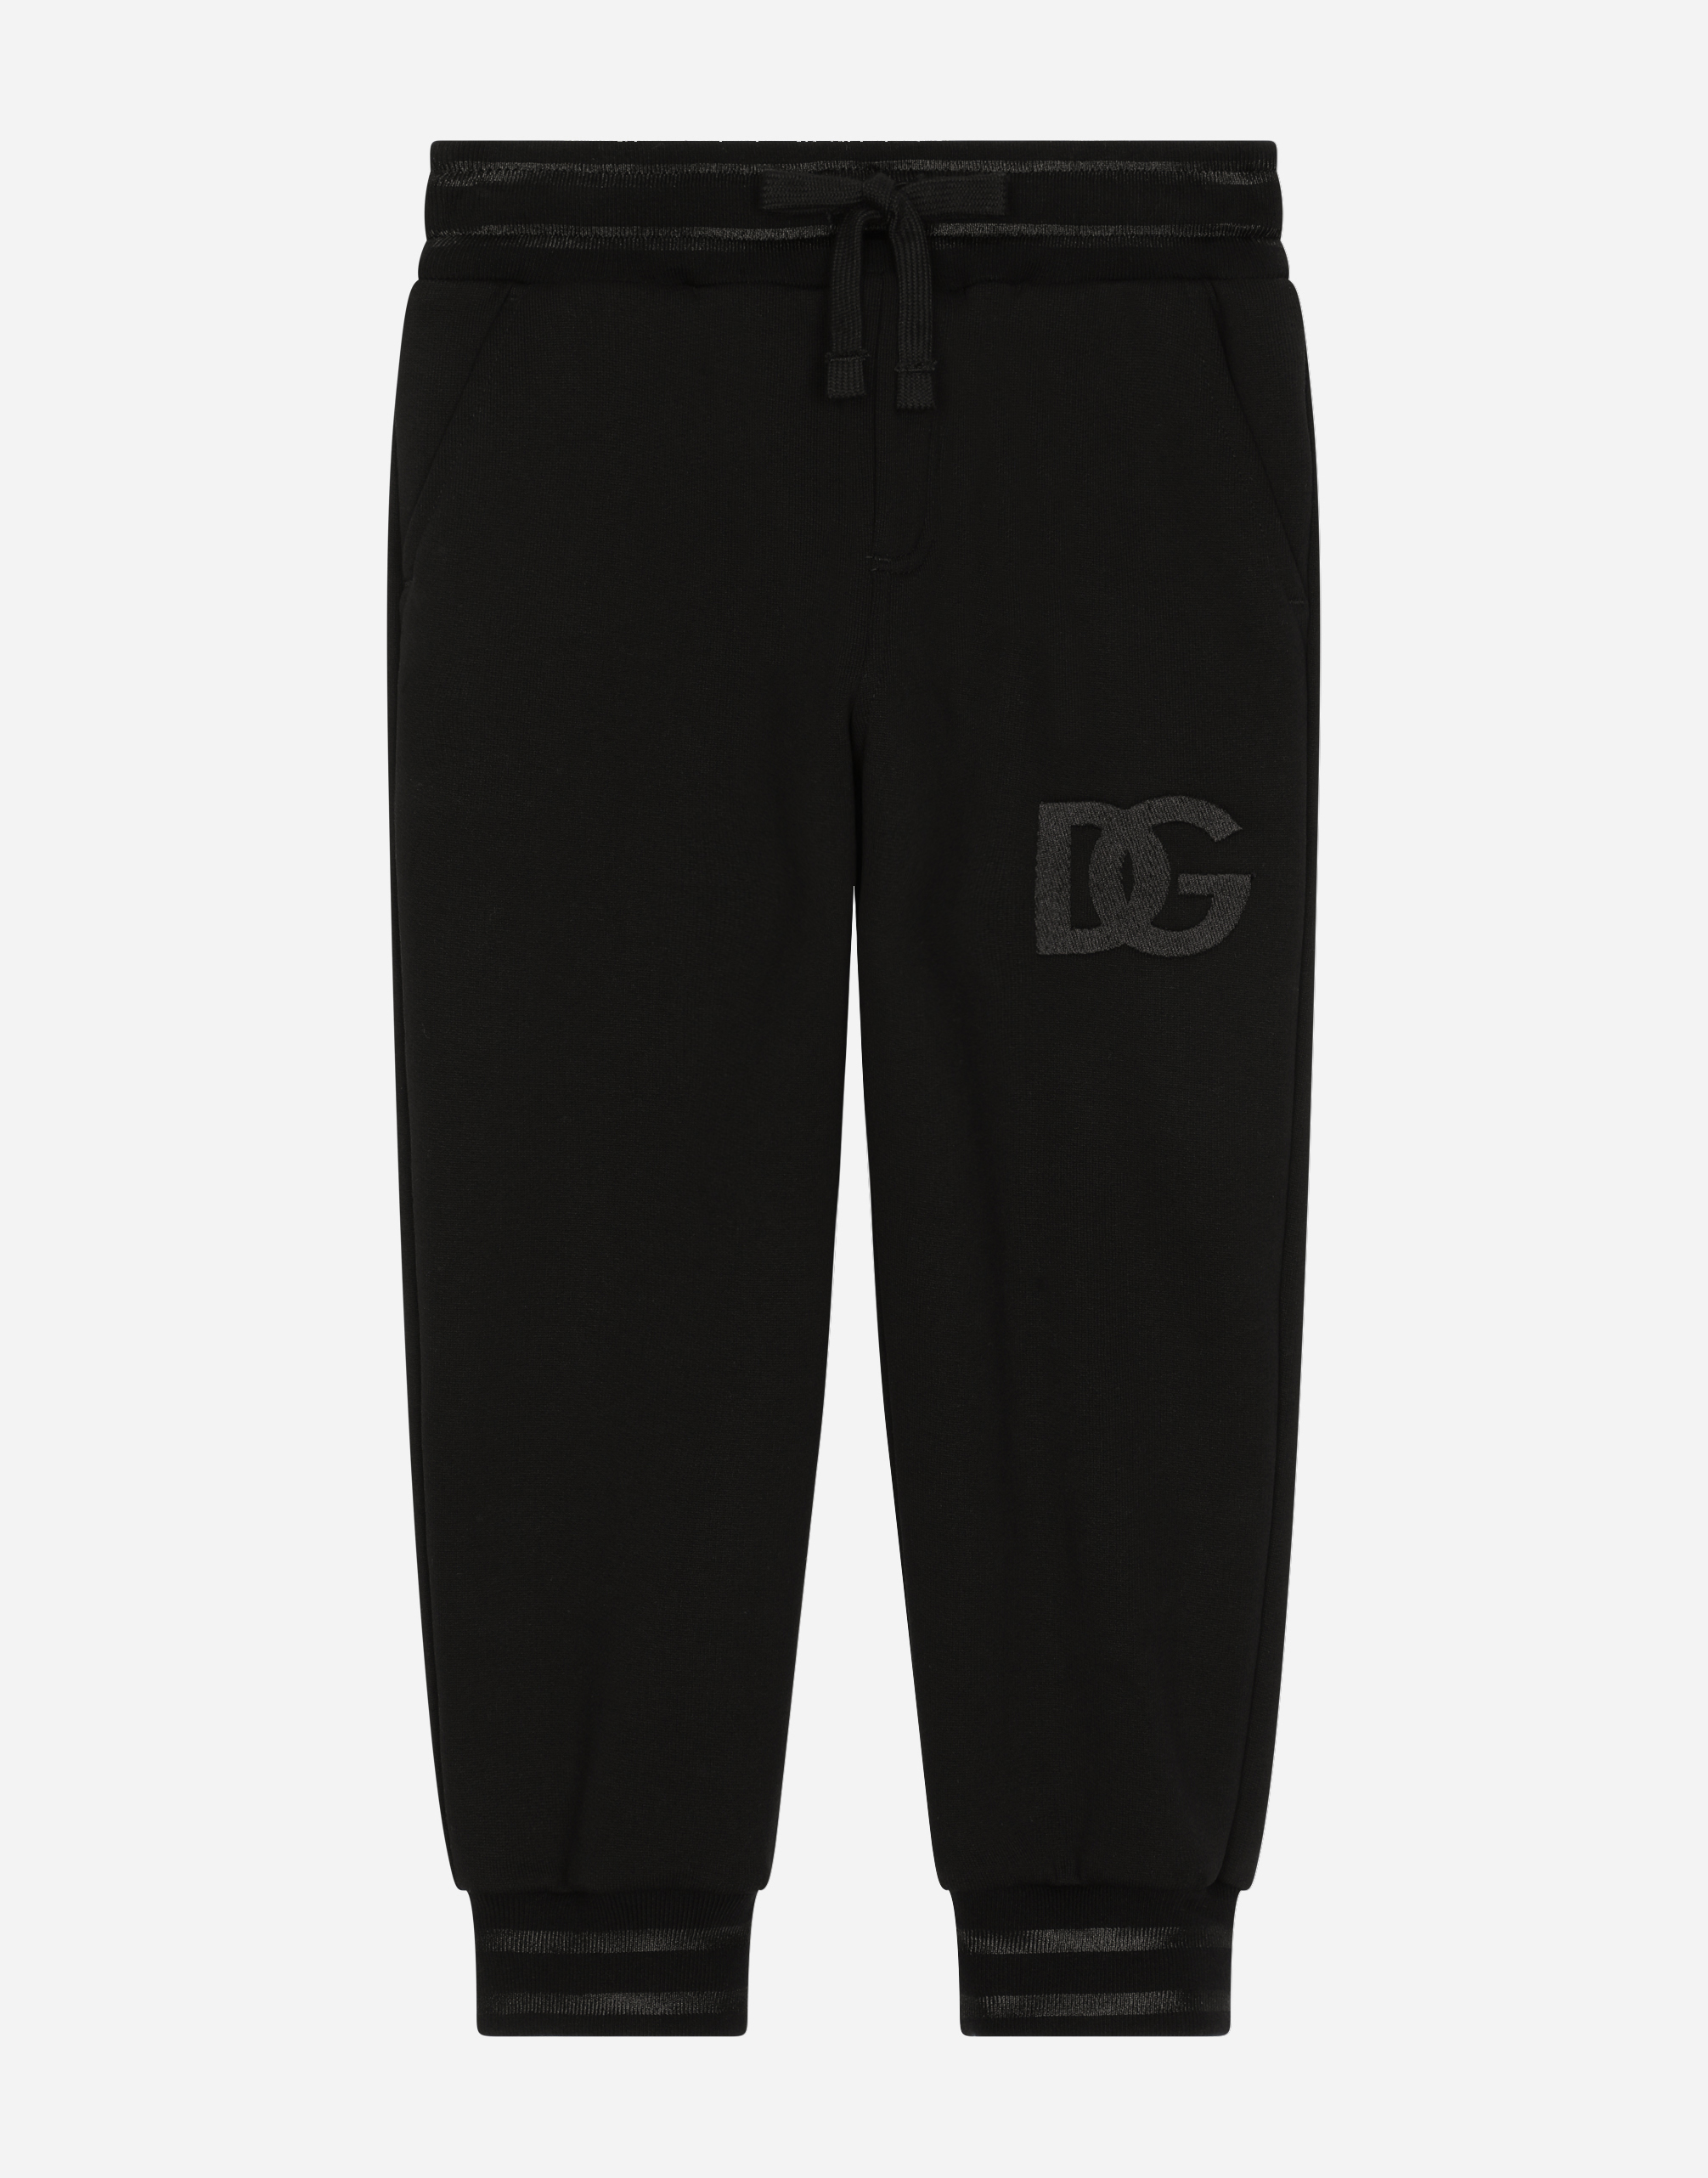 Jersey jogging pants with DG logo embroidery in Black